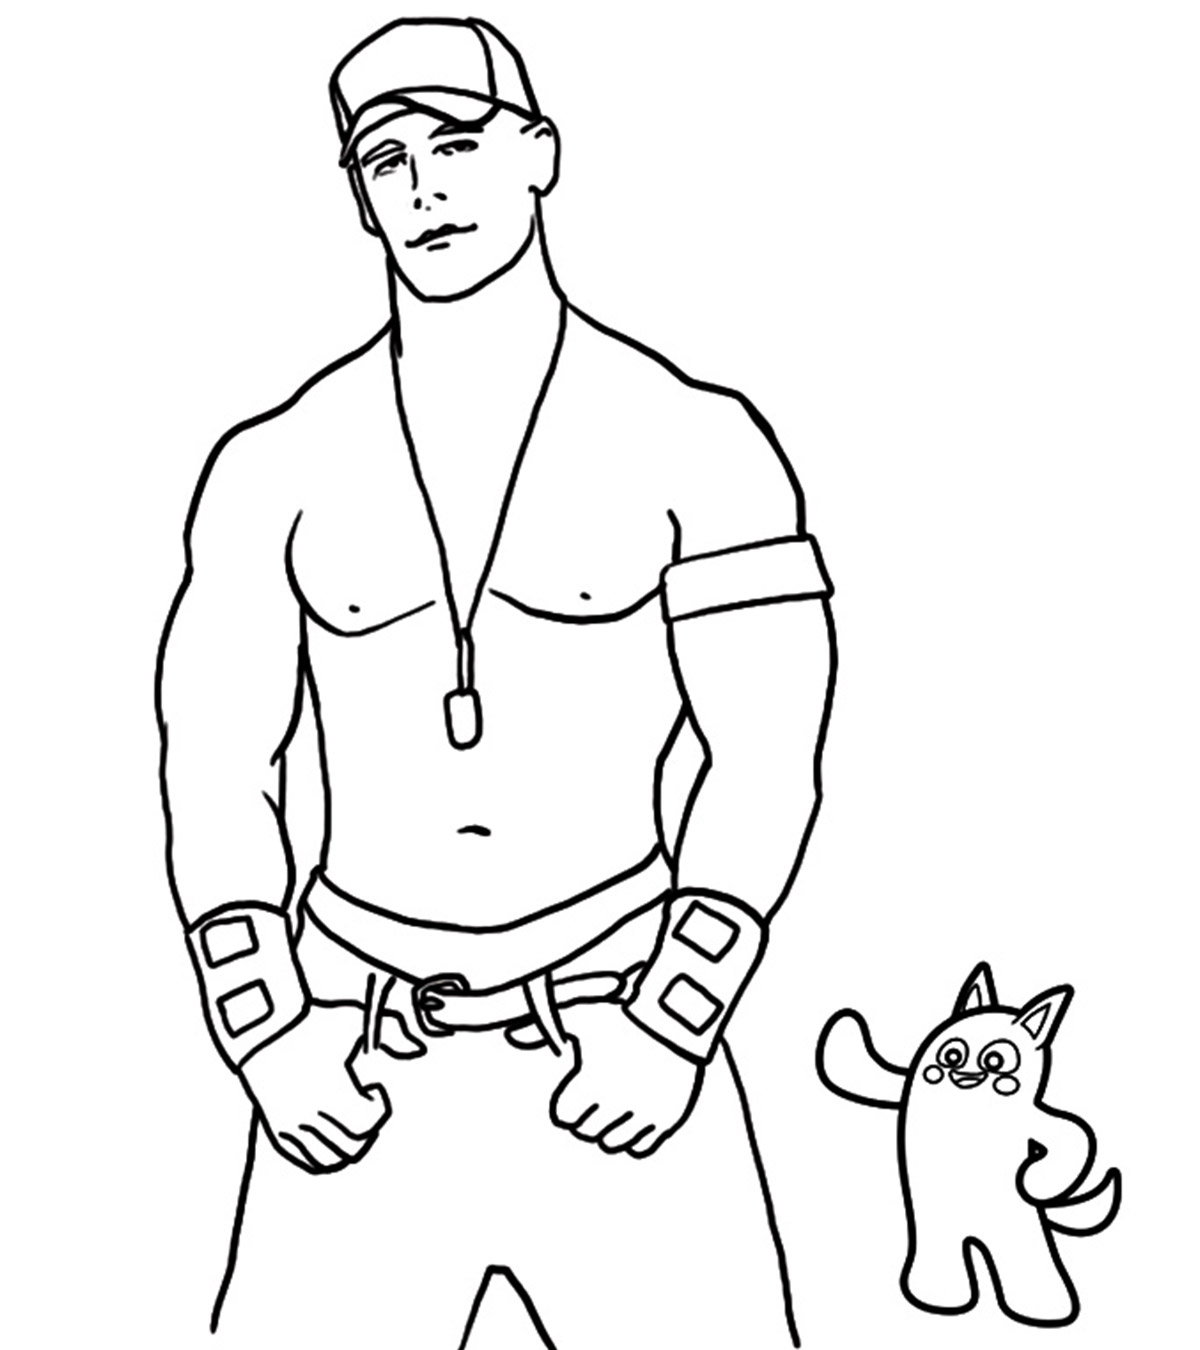 Wwe Coloring Pages Of John Cena Top 15 Free Printable John Cena Coloring Pages Online